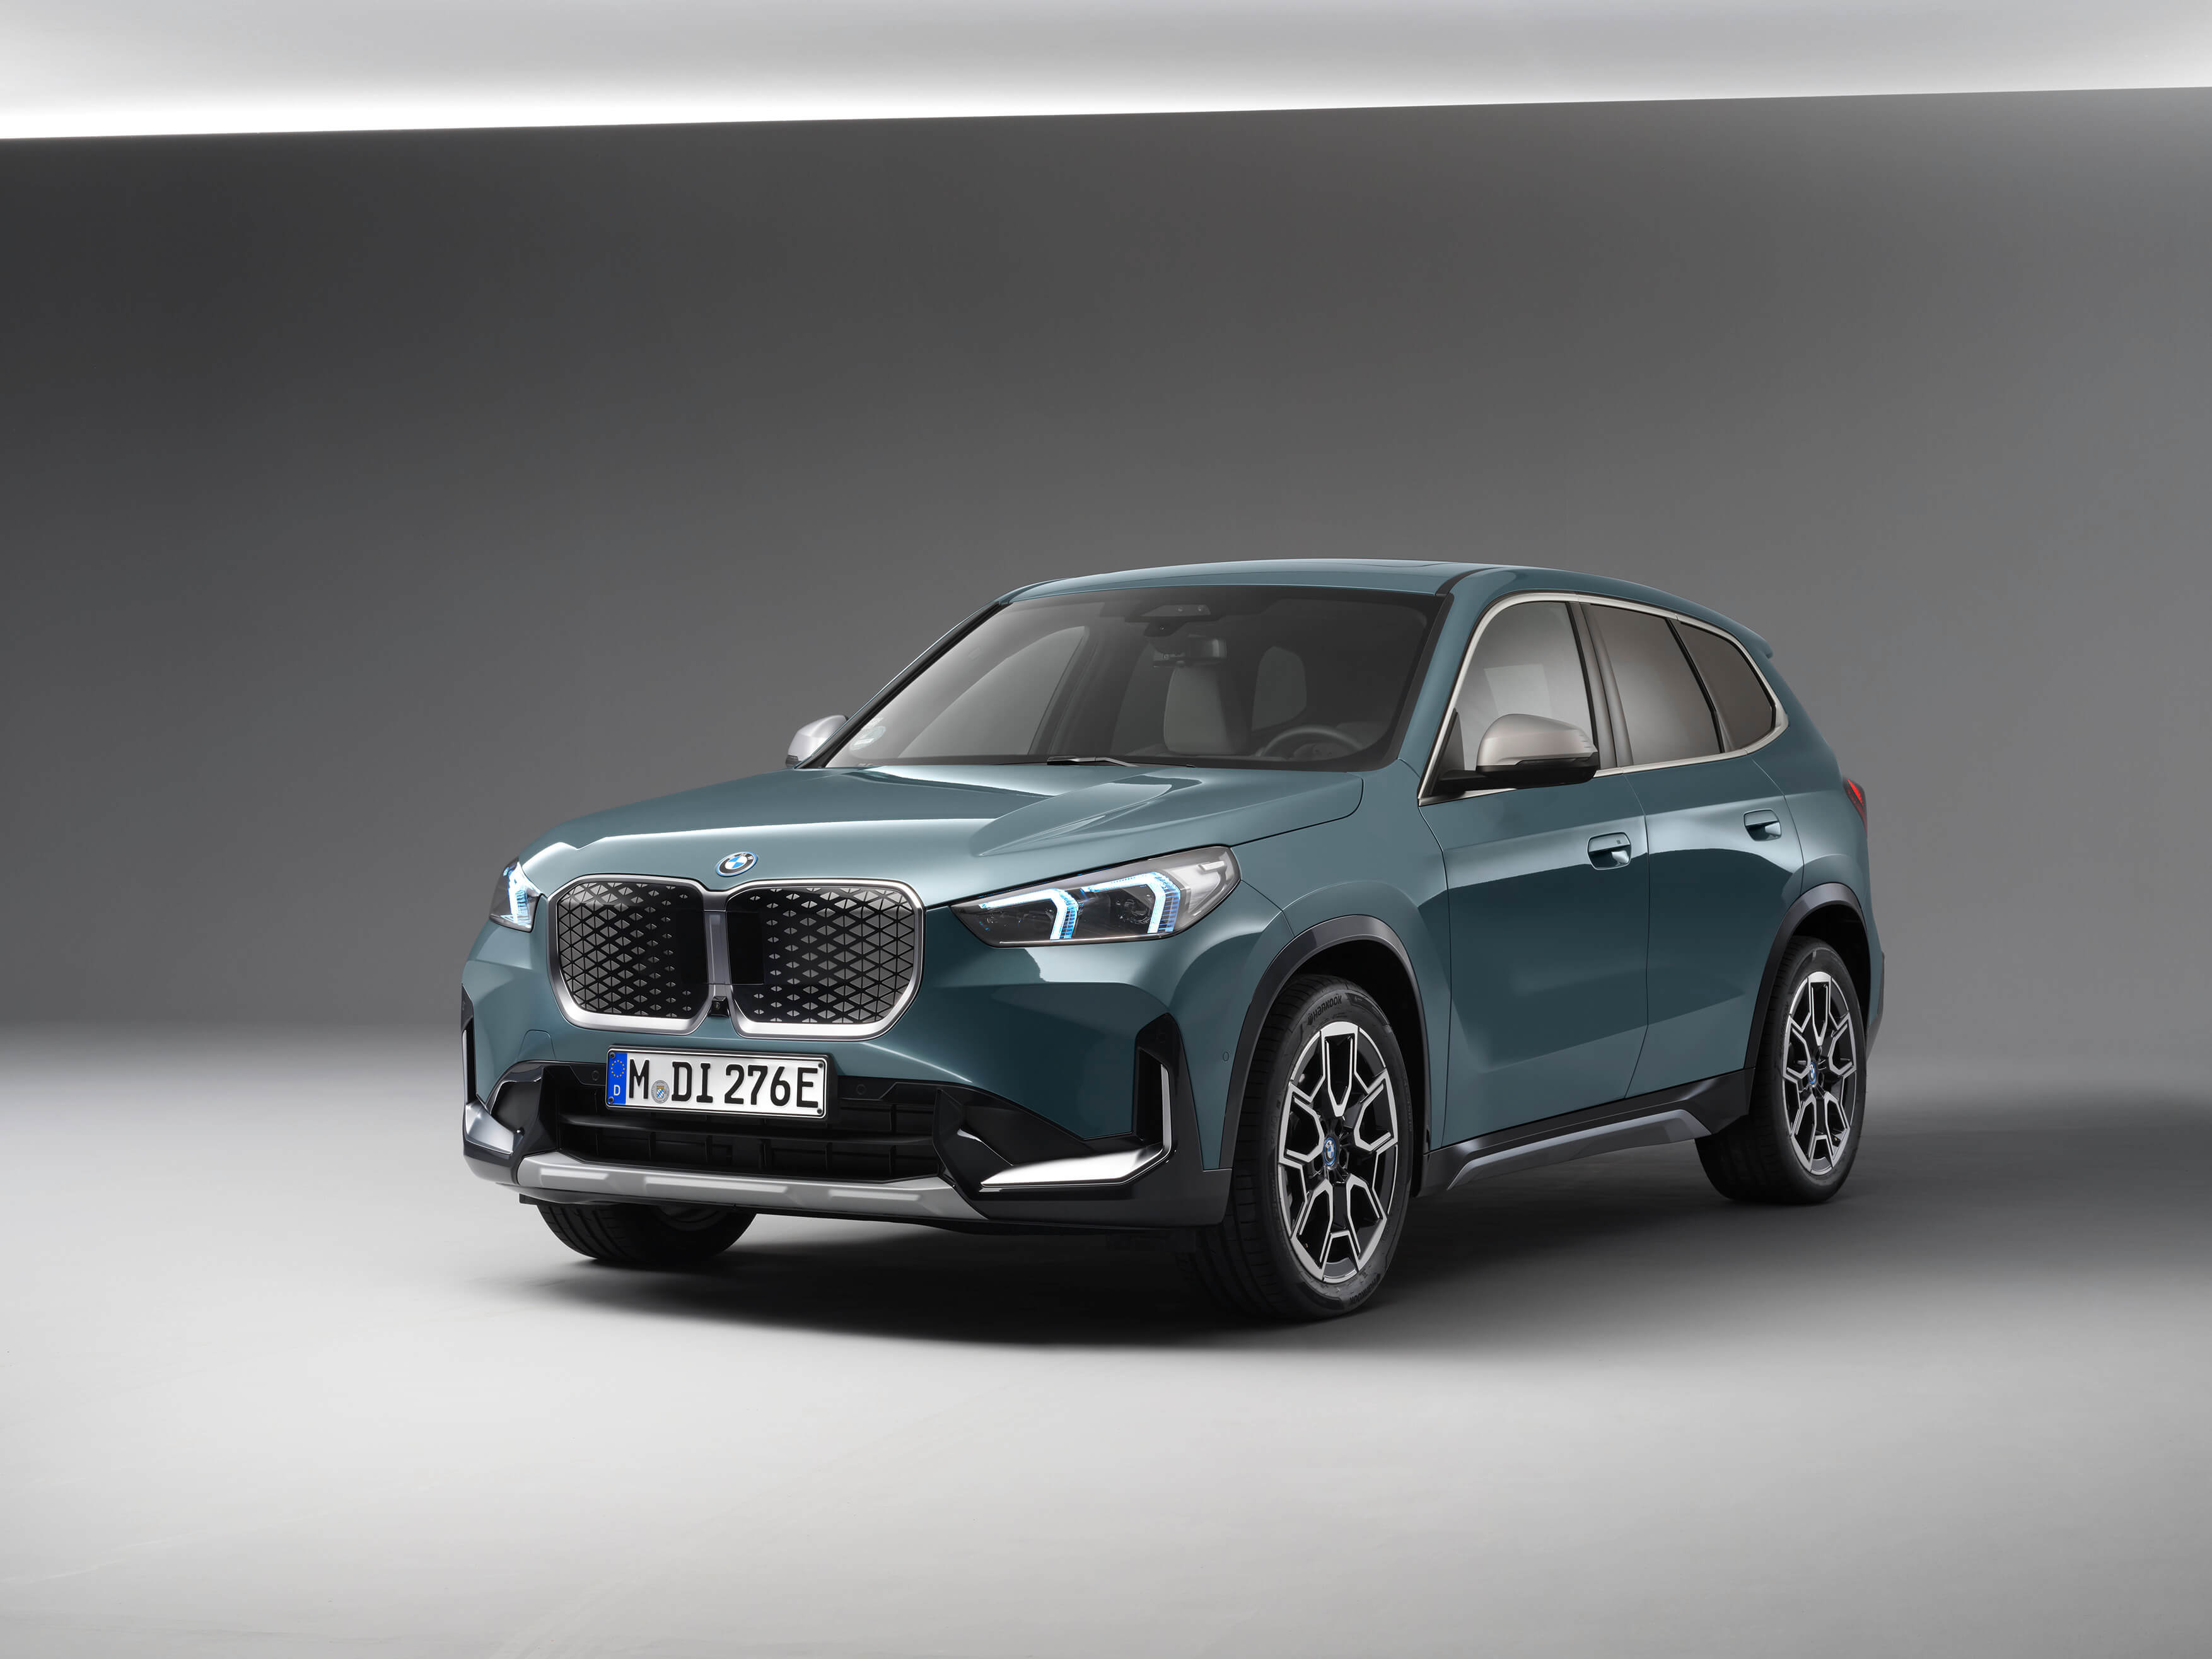 BMW iX1: An Entry Level BMW Electric SAV Launched in Nepal